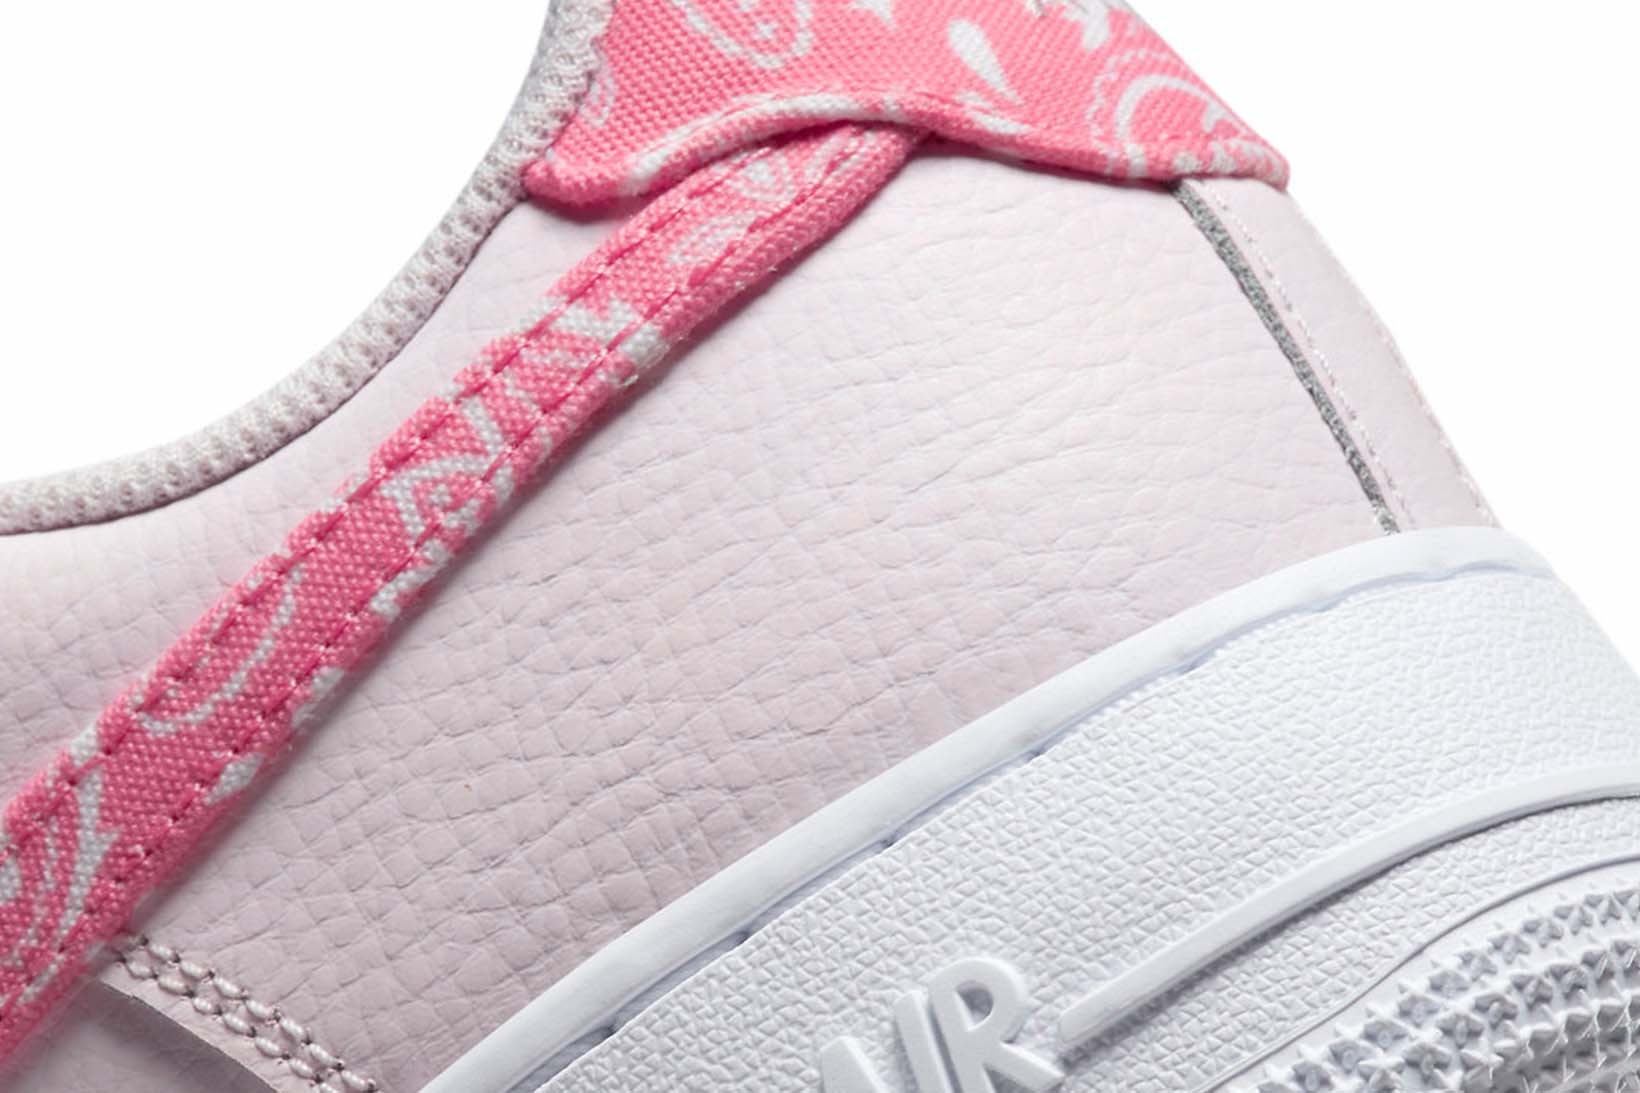 Nike Air Force 1 Low Womens Pink Paisley FD1448-664 Release Date